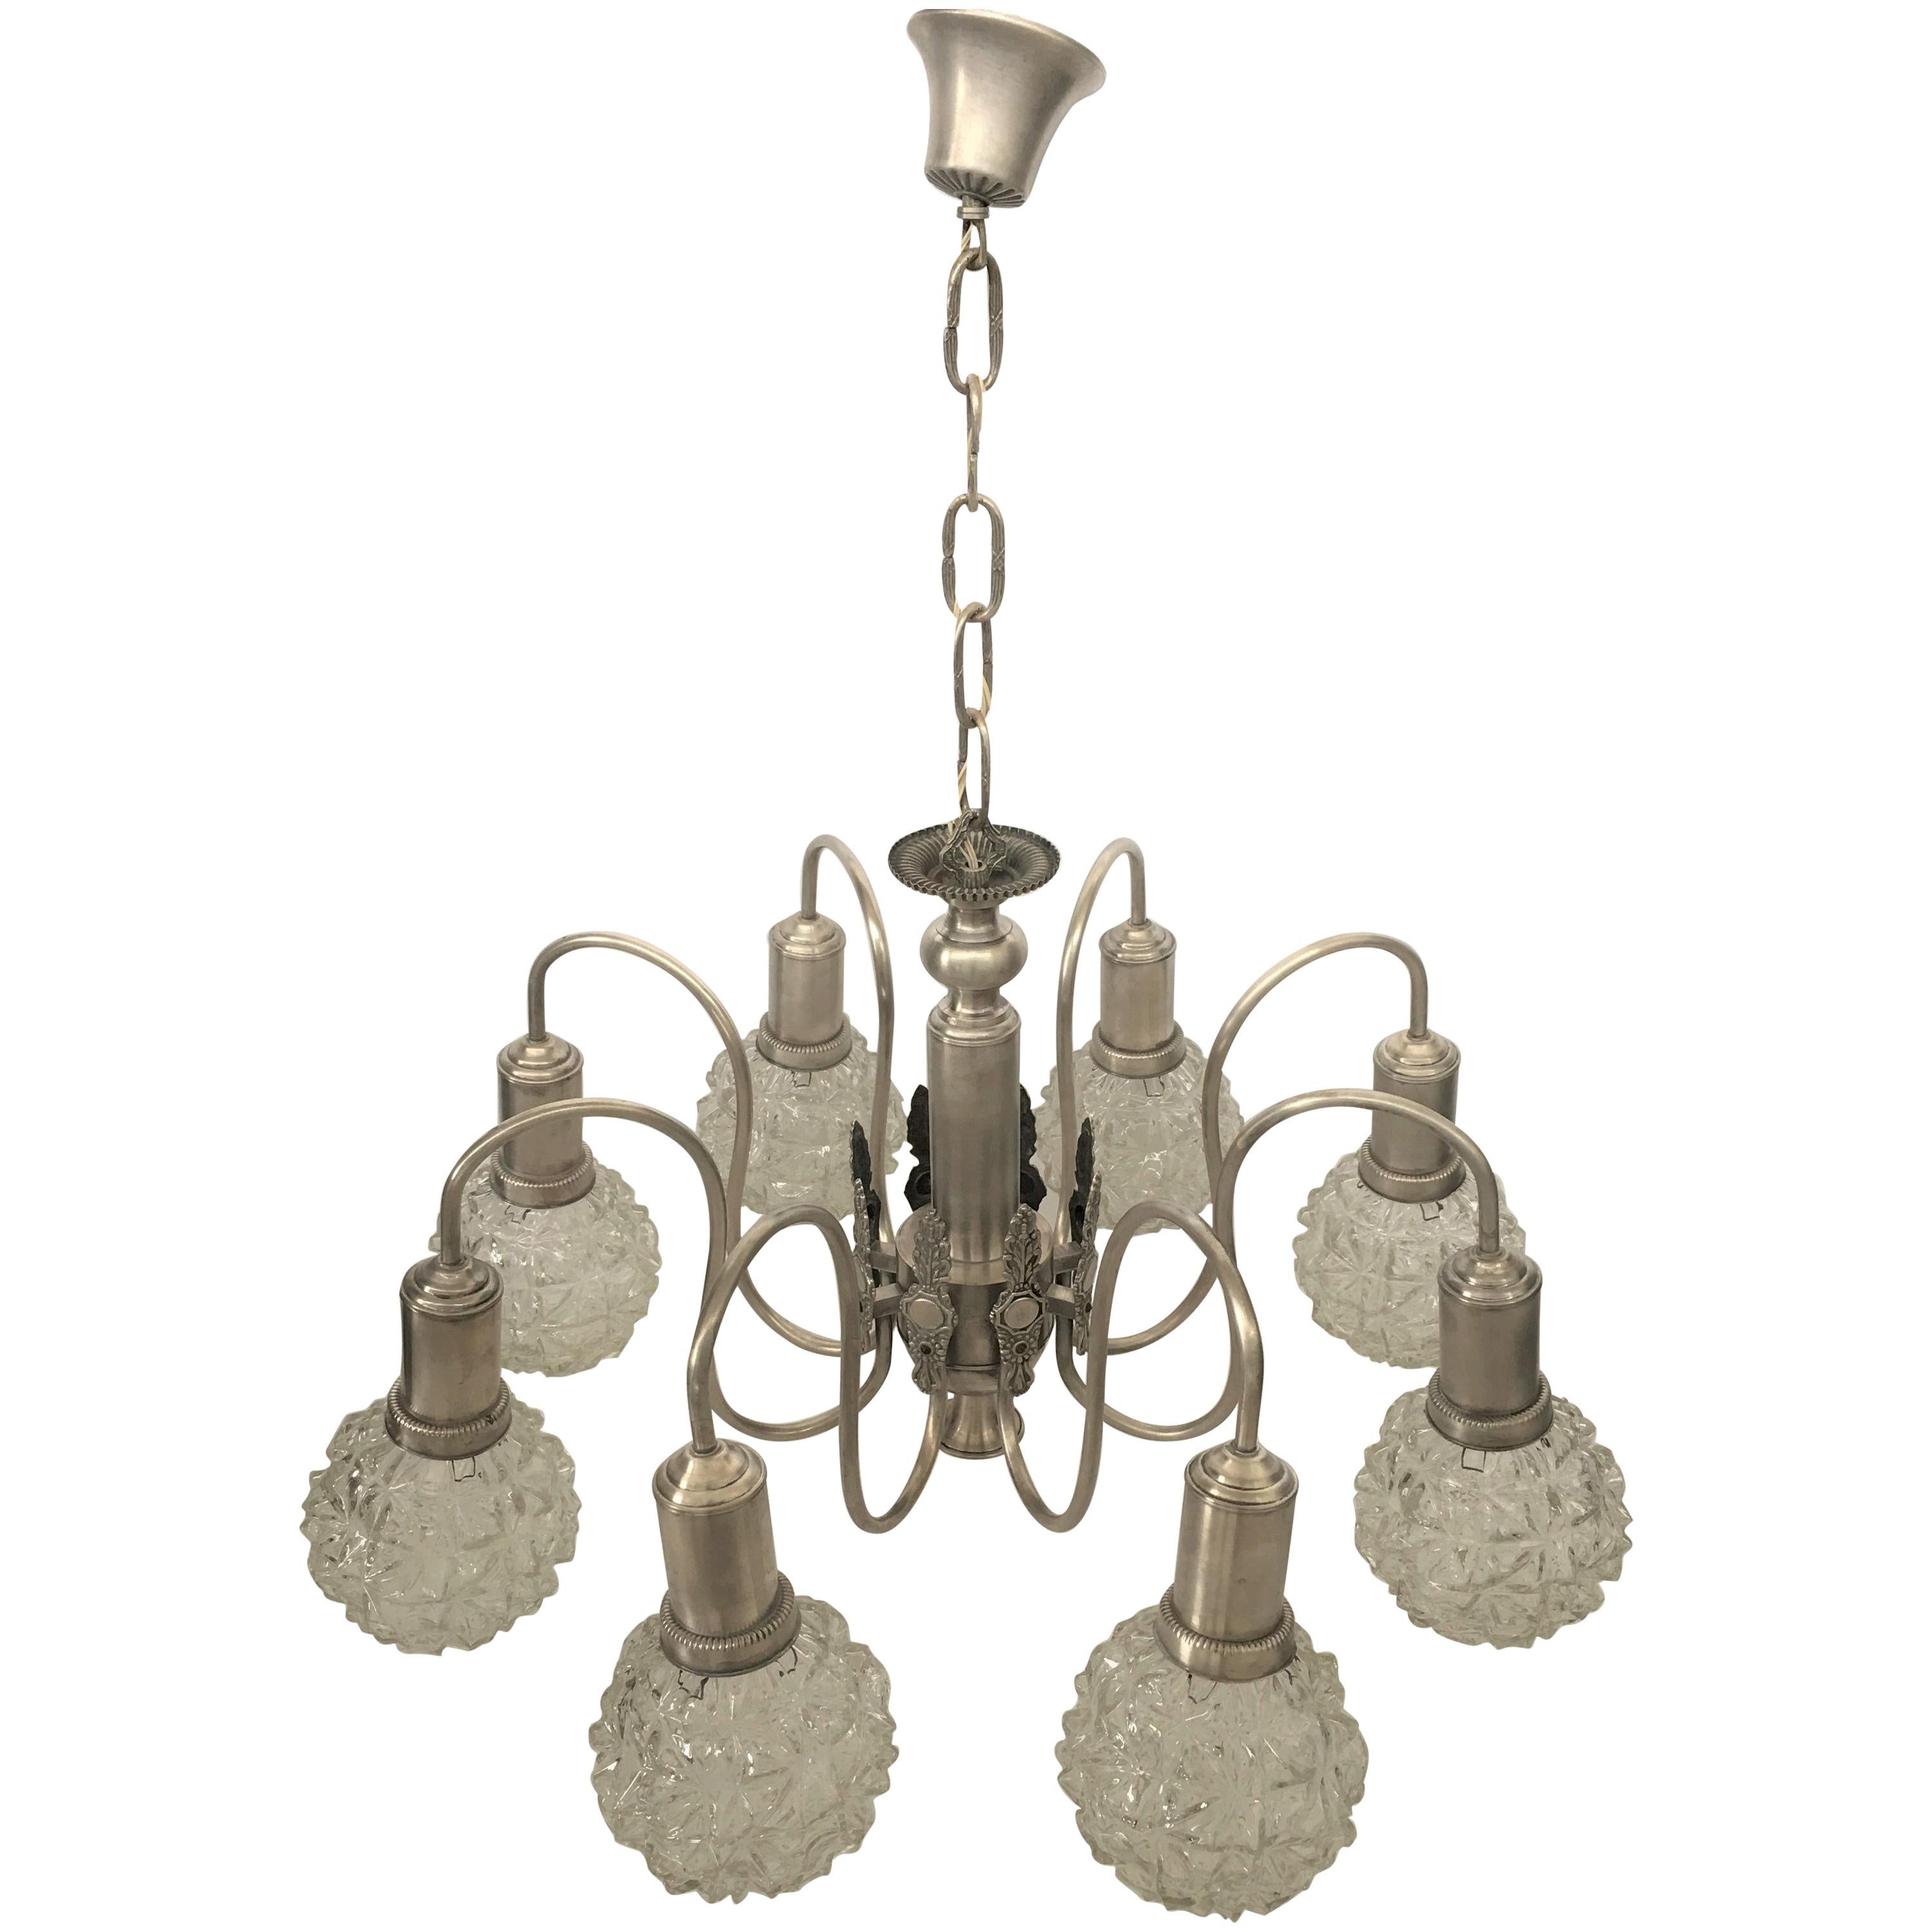 Art Deco Spider Ceiling Lamp with Eight Cut Glass Balls